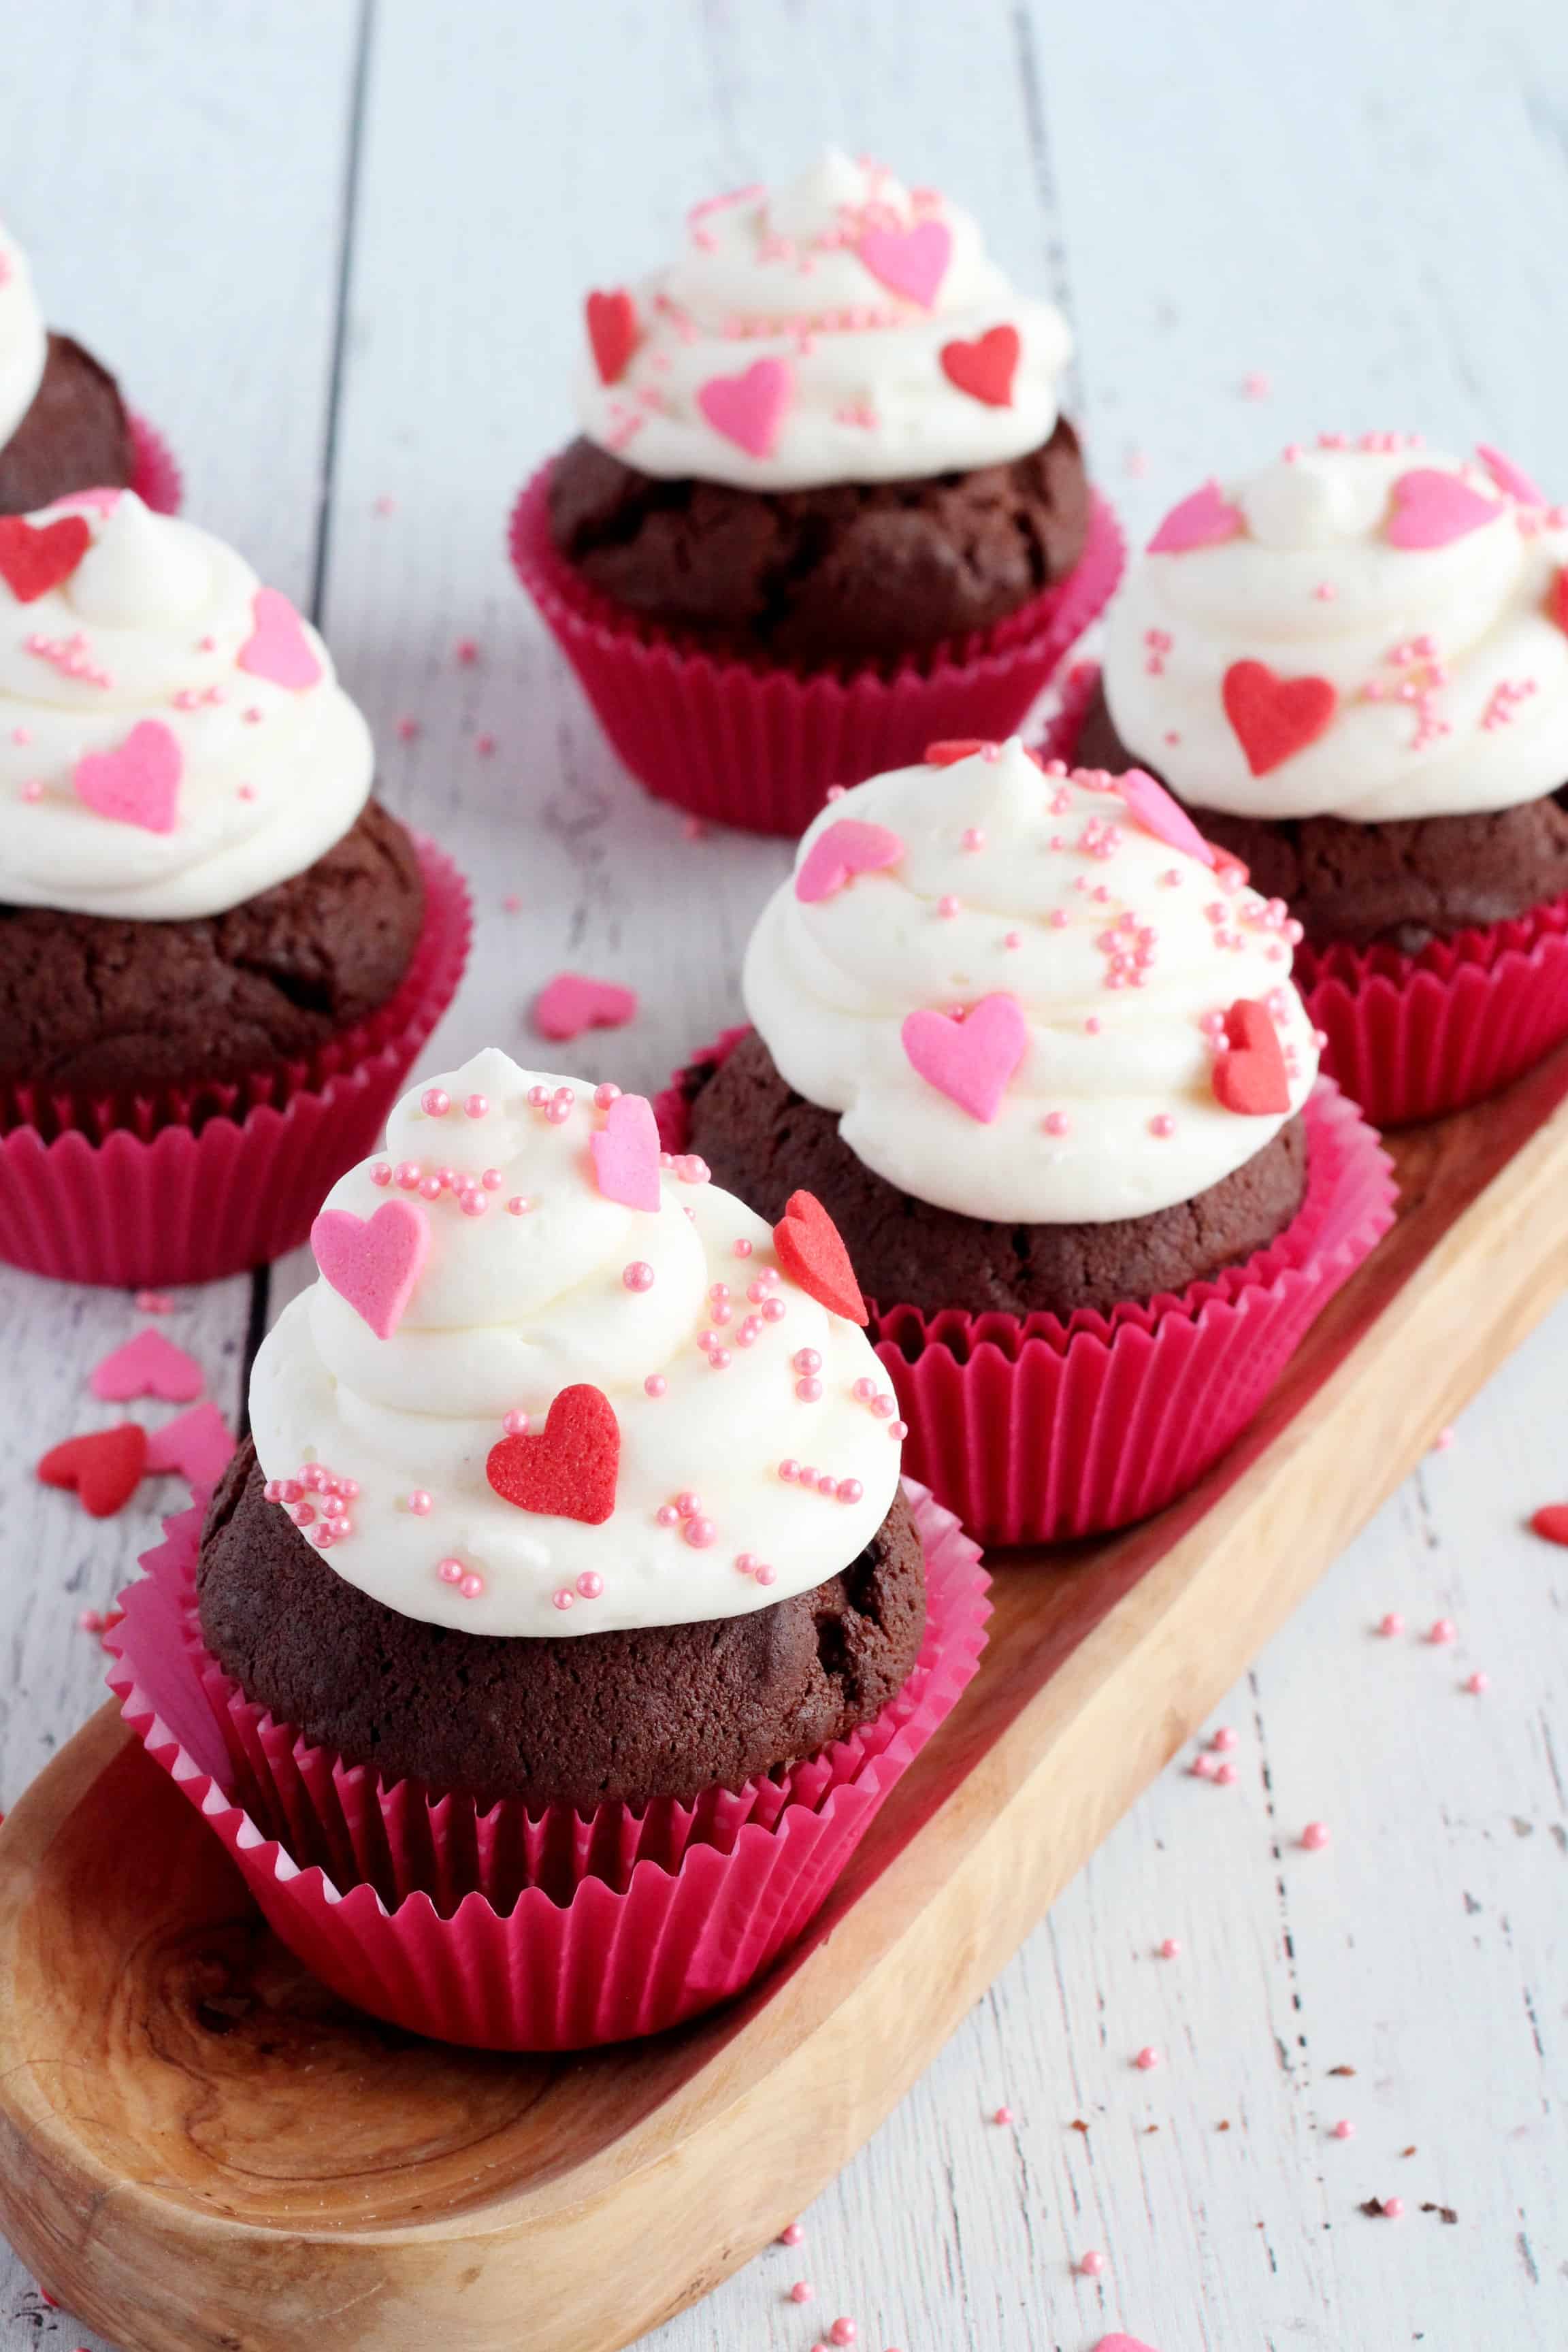 chocolate cupcakes topped with whipped cream and decorated with red and pink sprinkles